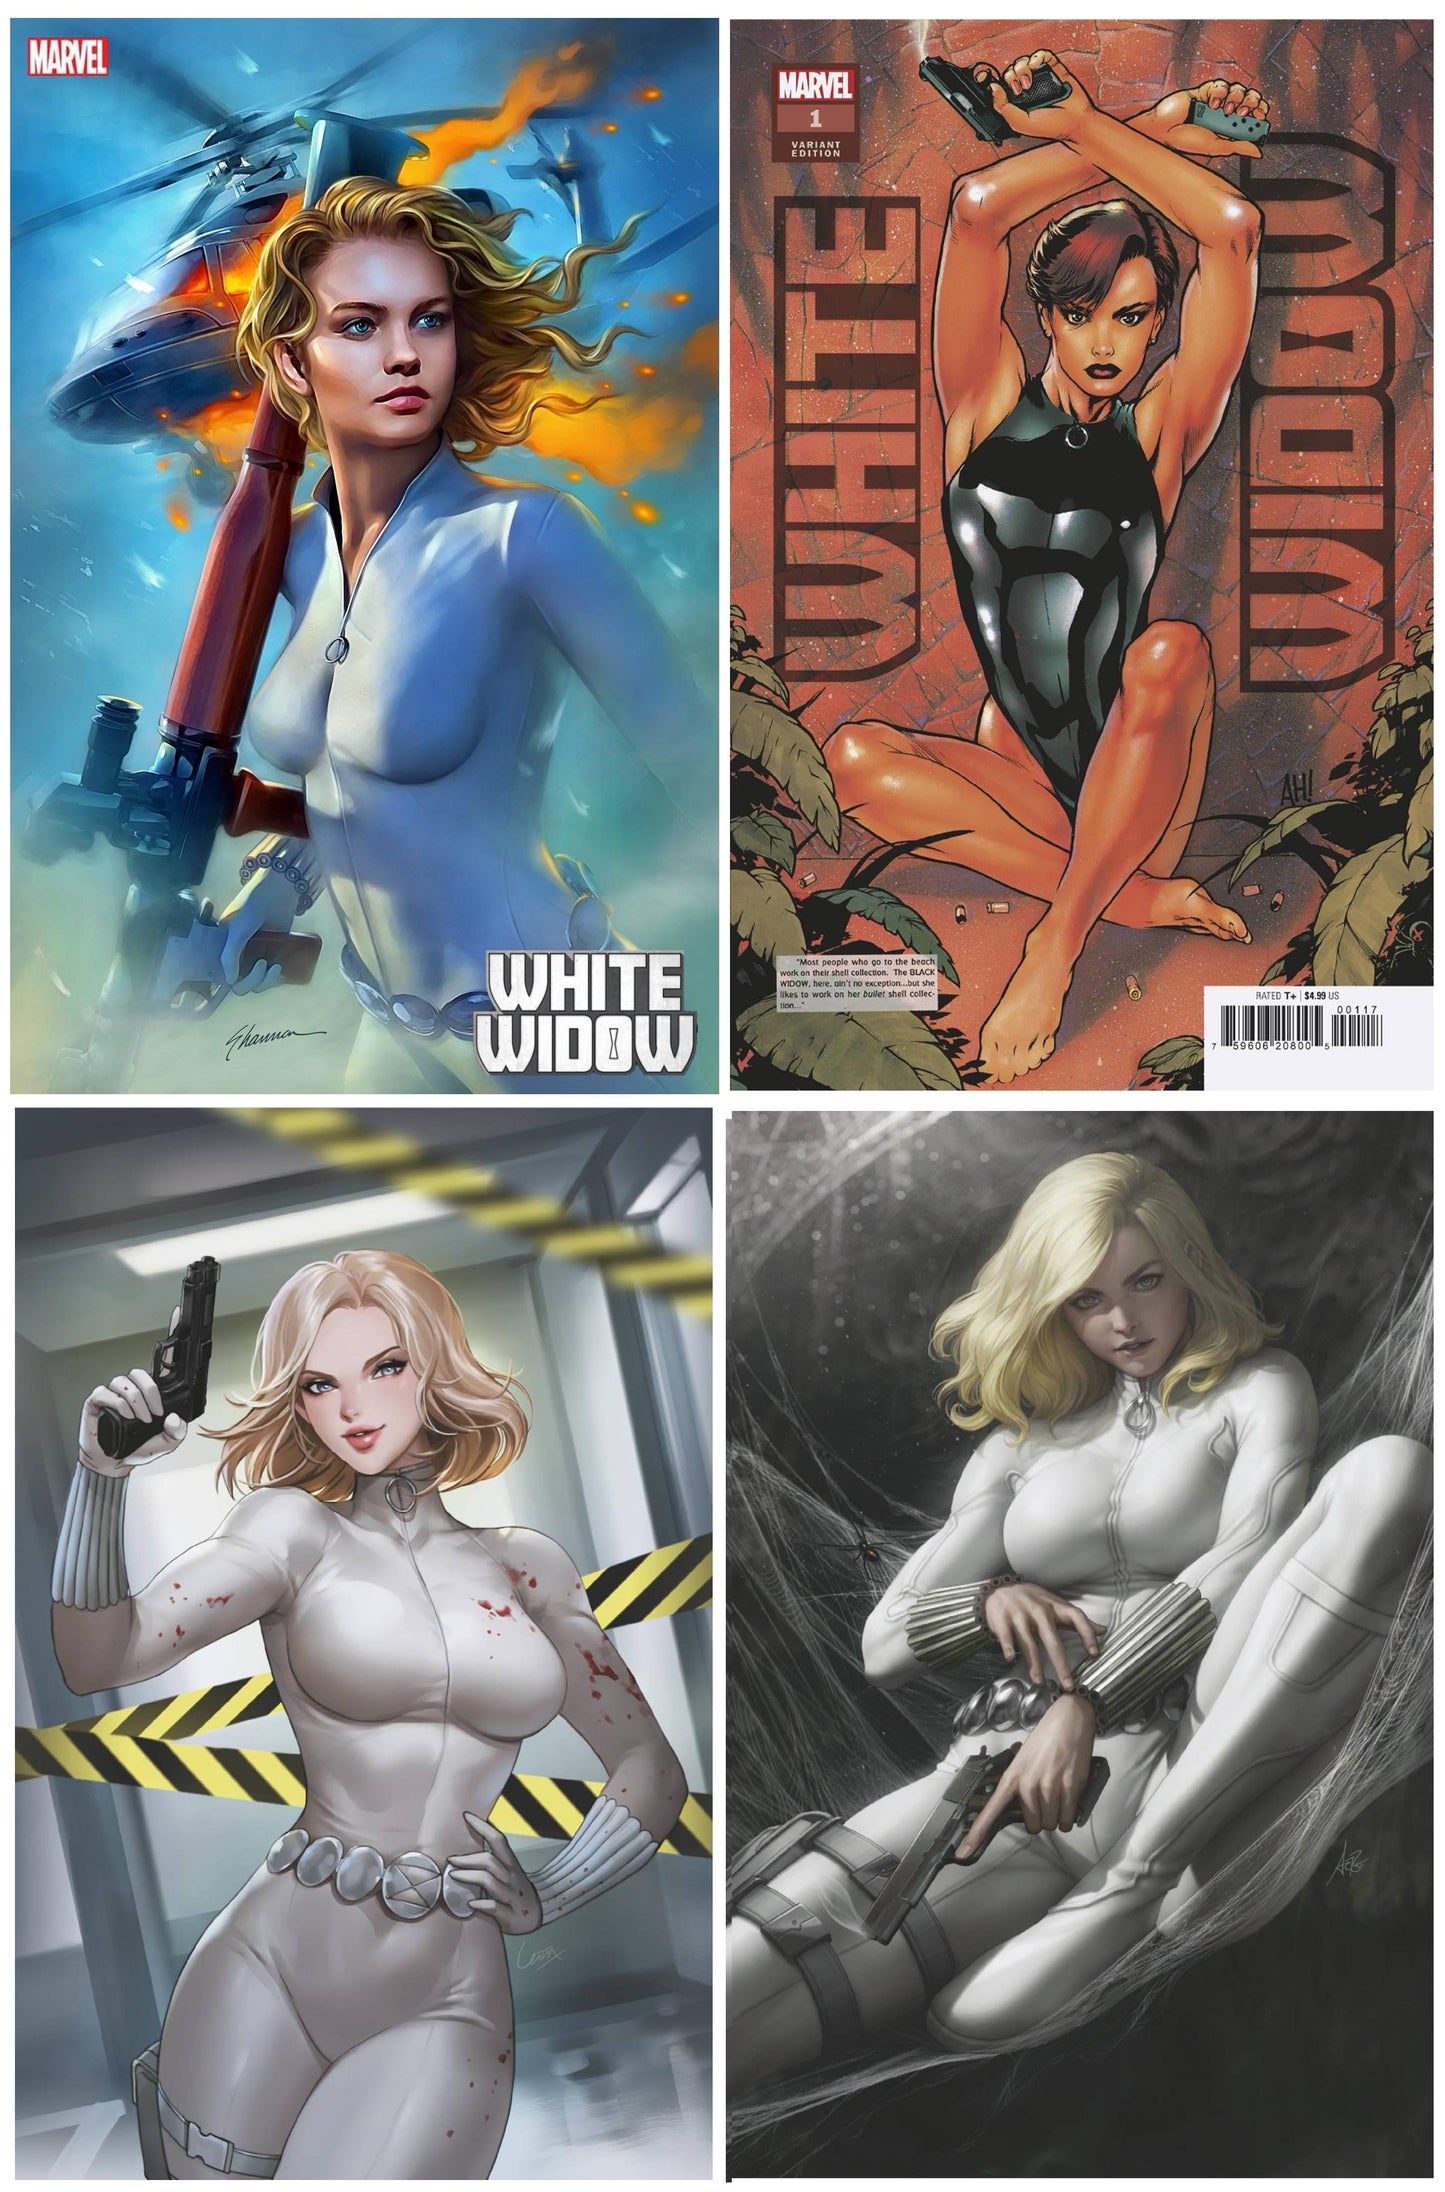 WHITE WIDOW #1 SHANNON MAER VARIANT LIMITED TO 500 COPIES WITH NUMBERED COA + 1:25, 1:50 & 1:100 VARIANT